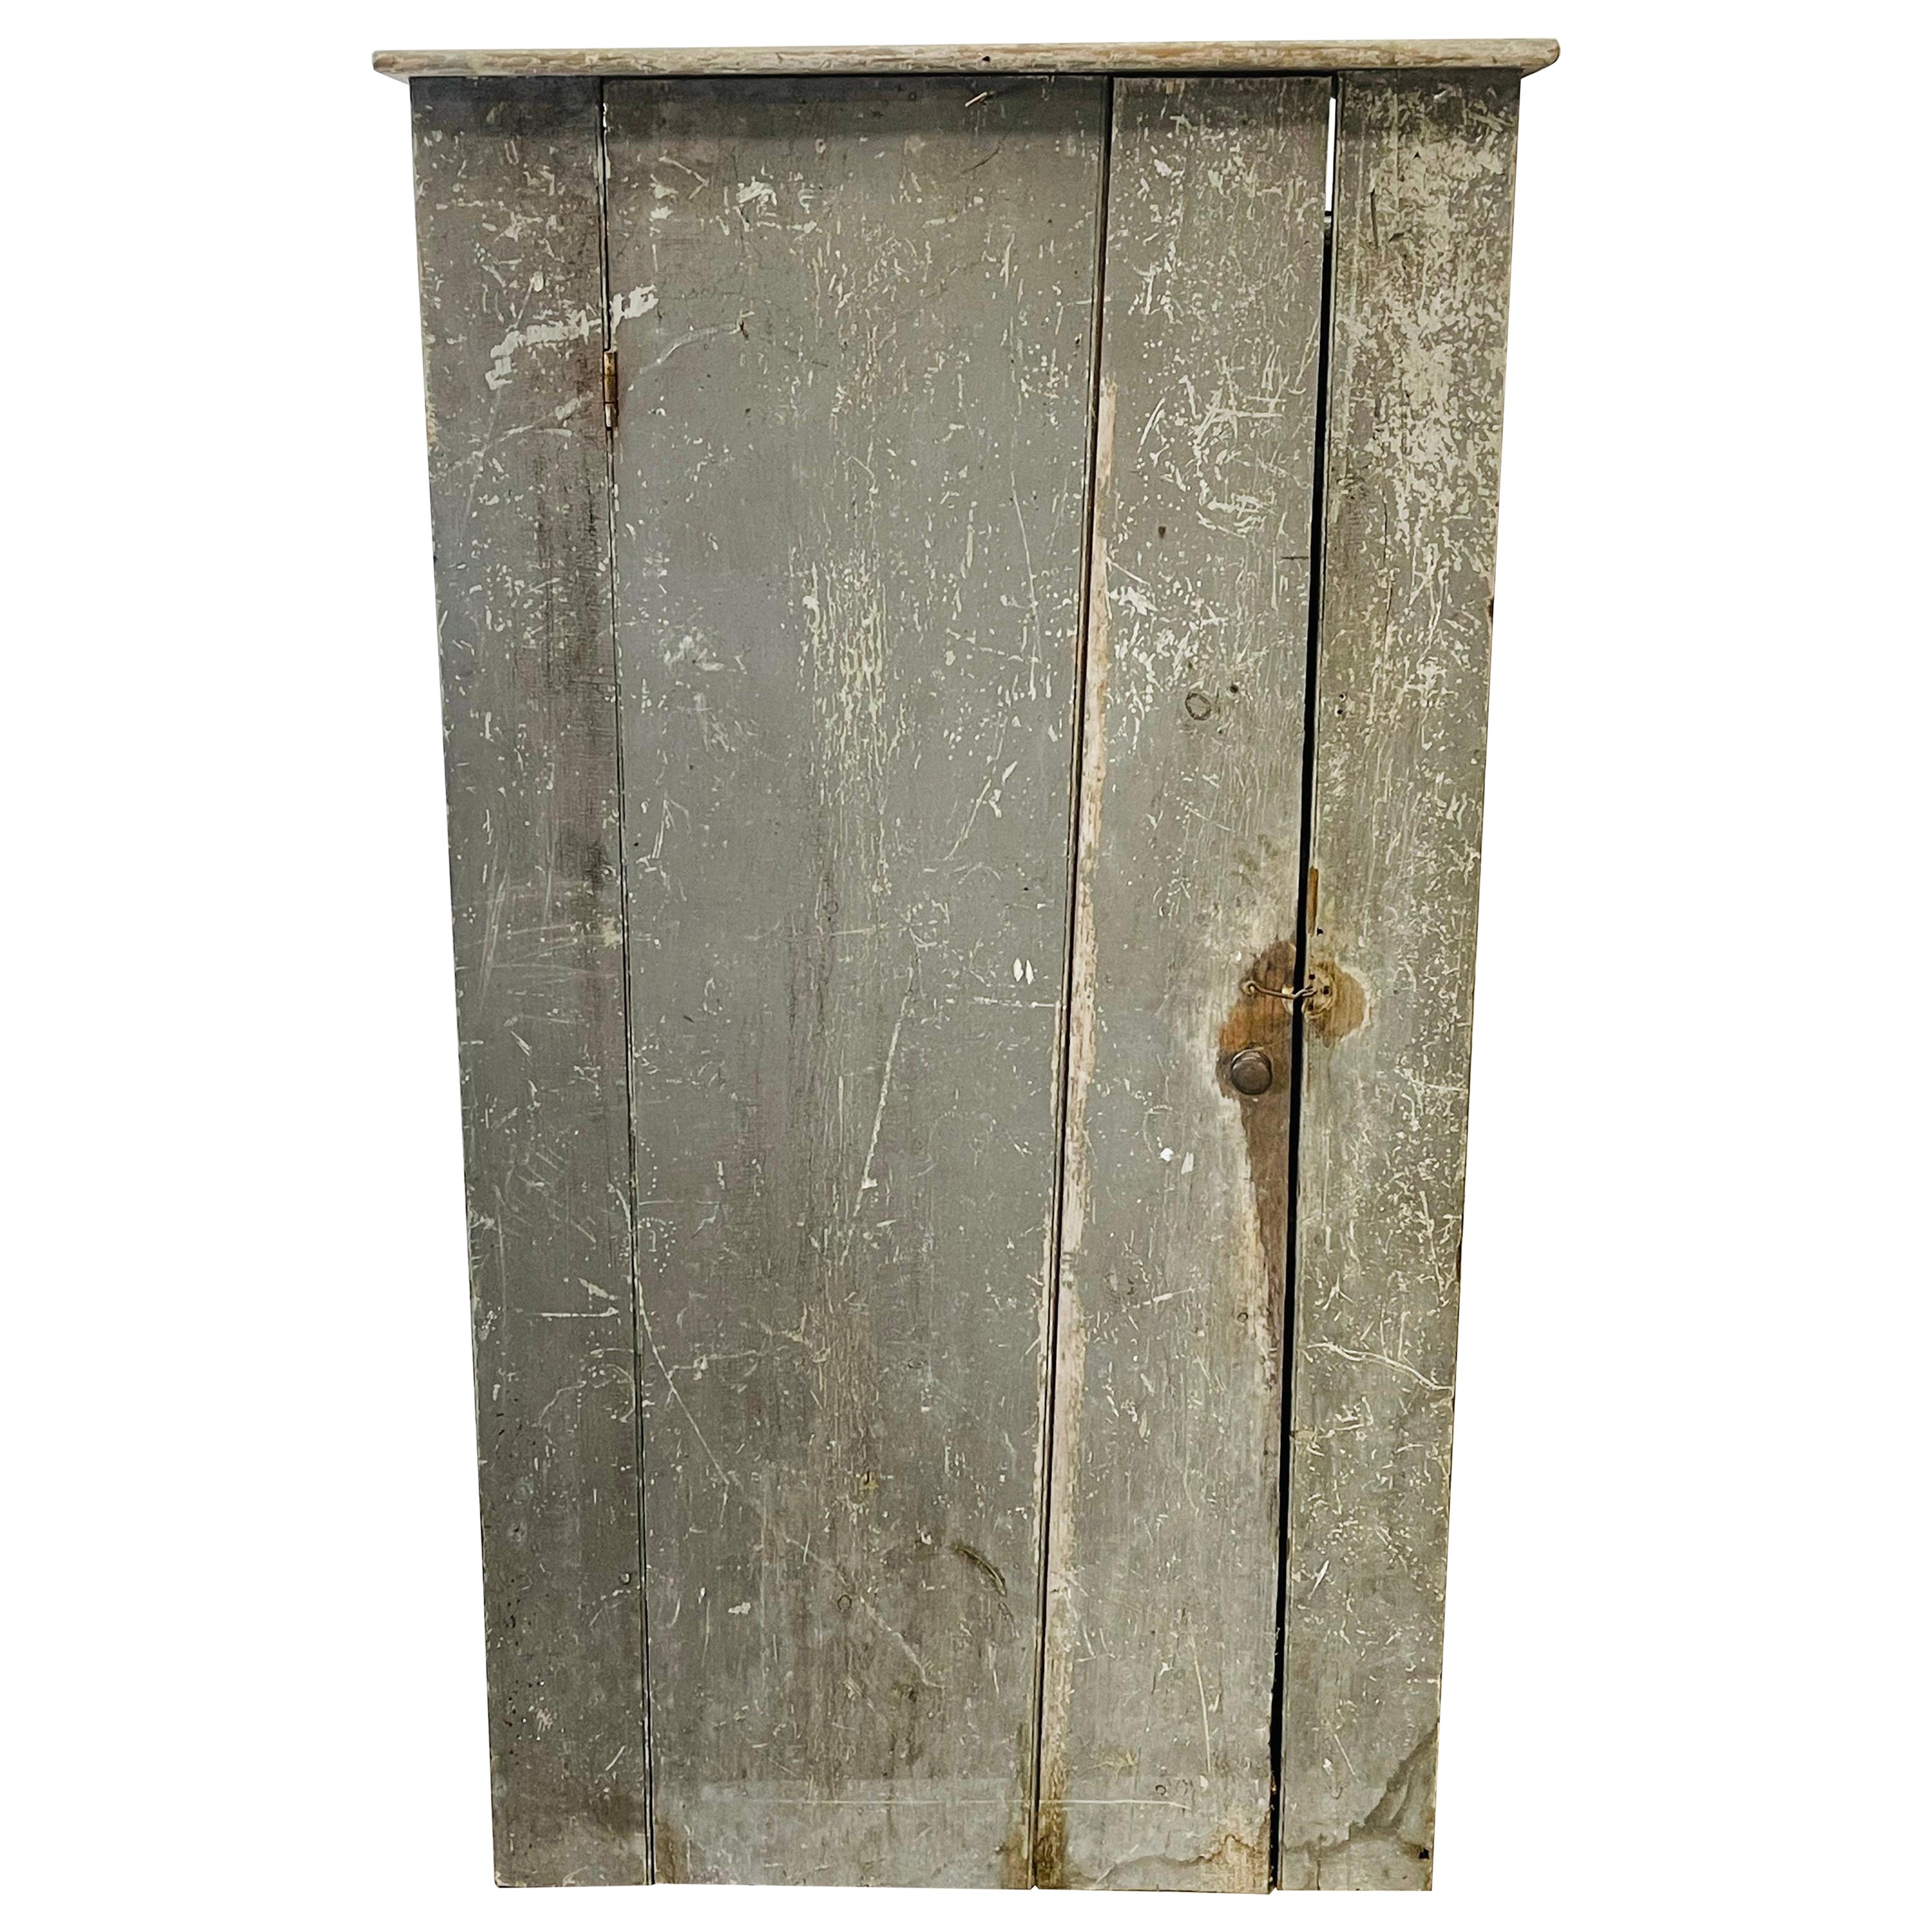 New England Farmhouse Antique Rustic Cupboard For Sale